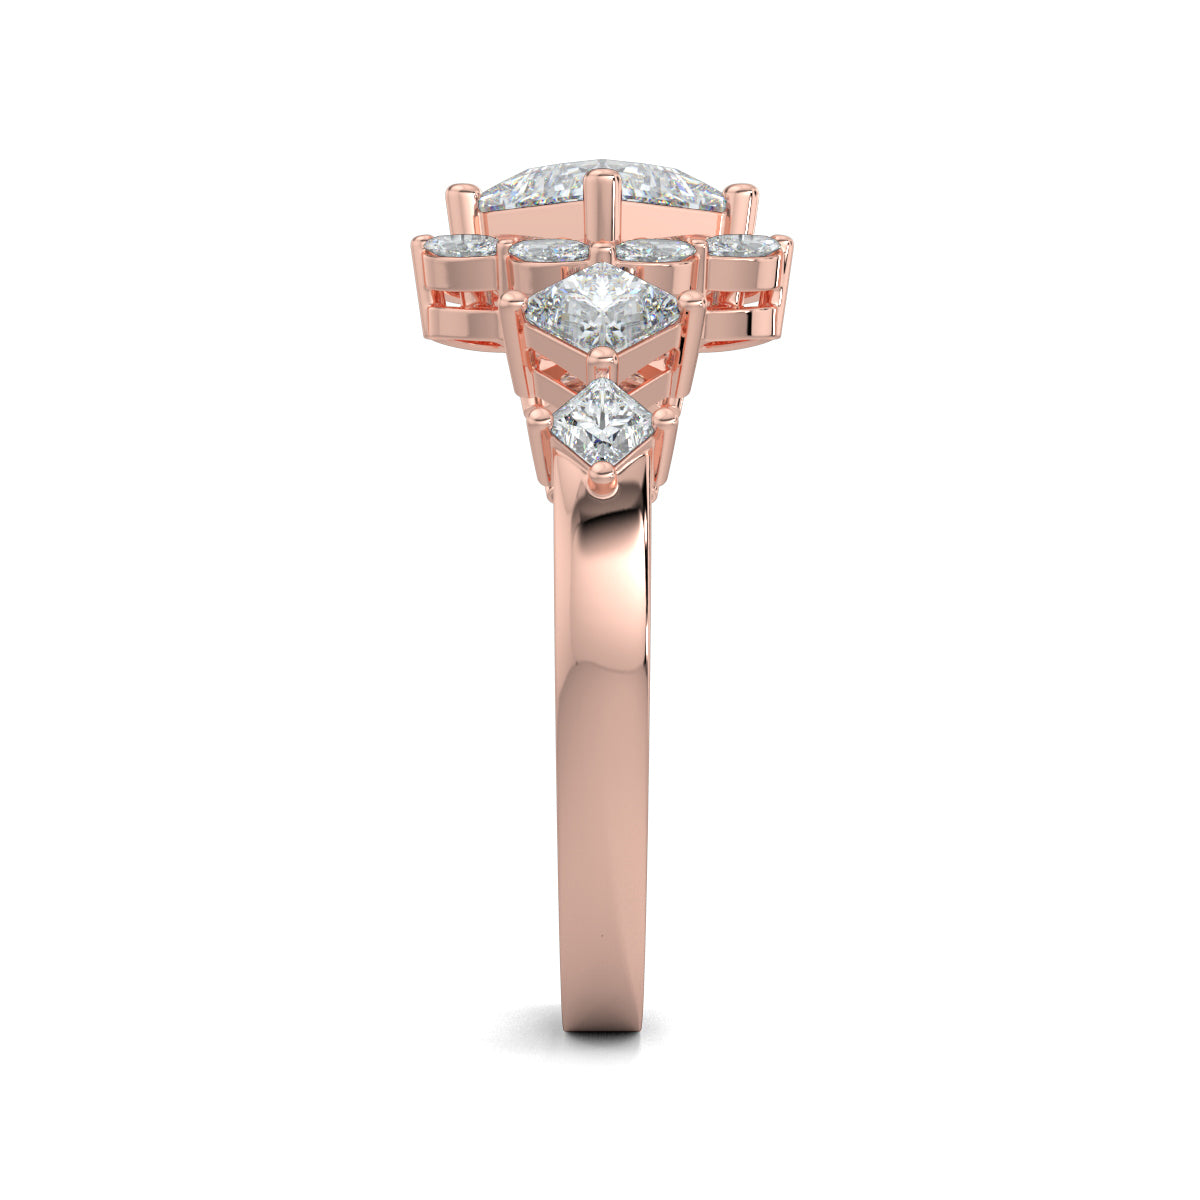 Rose Gold, Diamond Ring, Aurora Dream Solitaire Ring, natural diamonds, lab-grown diamonds, diamond ring, solitaire ring, princess diamond, marquise diamond, engagement ring, wedding ring, fine jewelry